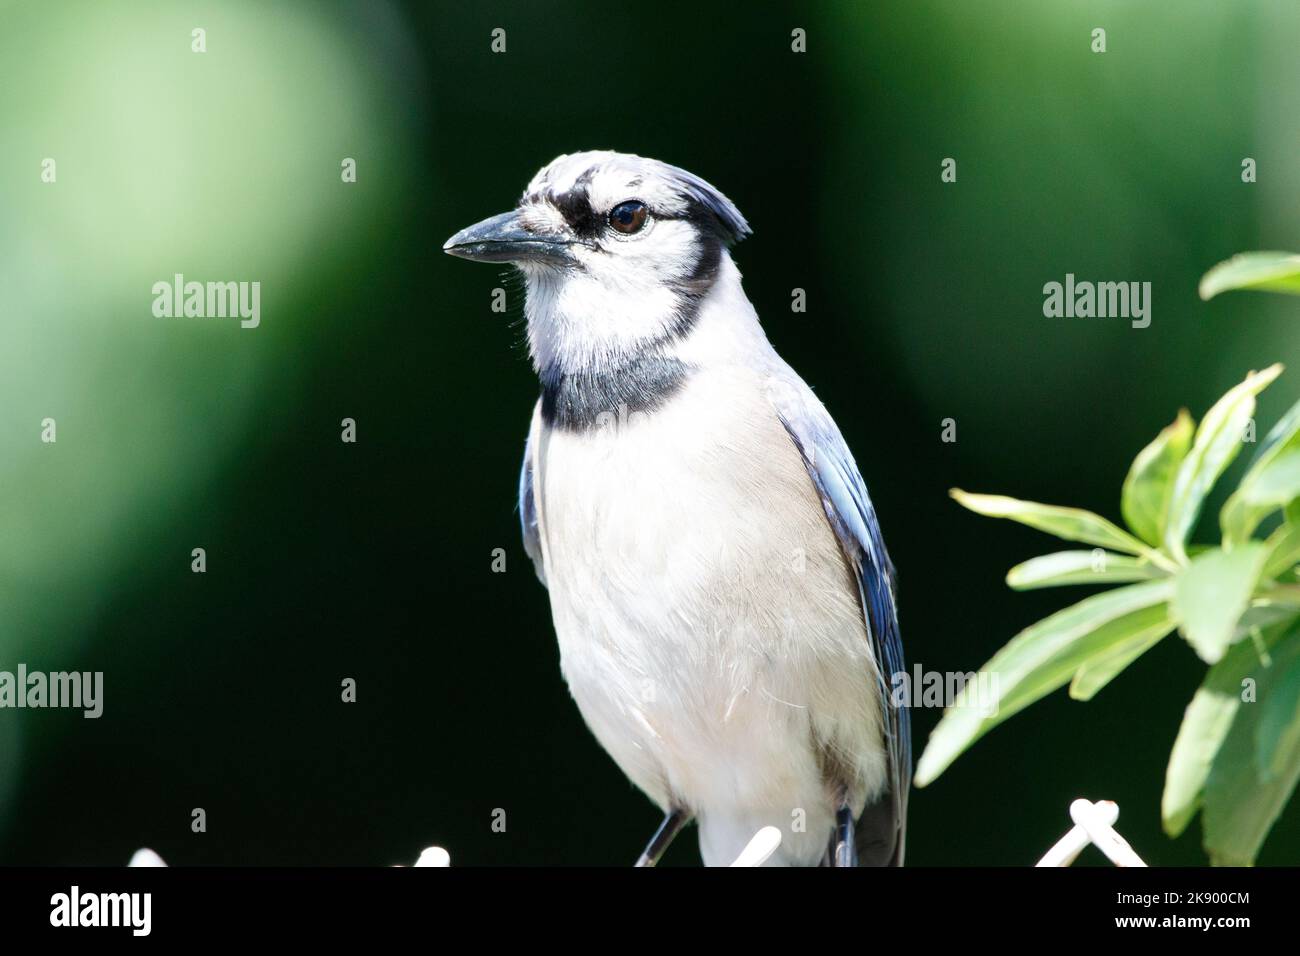 A closeup shot of a Blue jay with blurred background Stock Photo